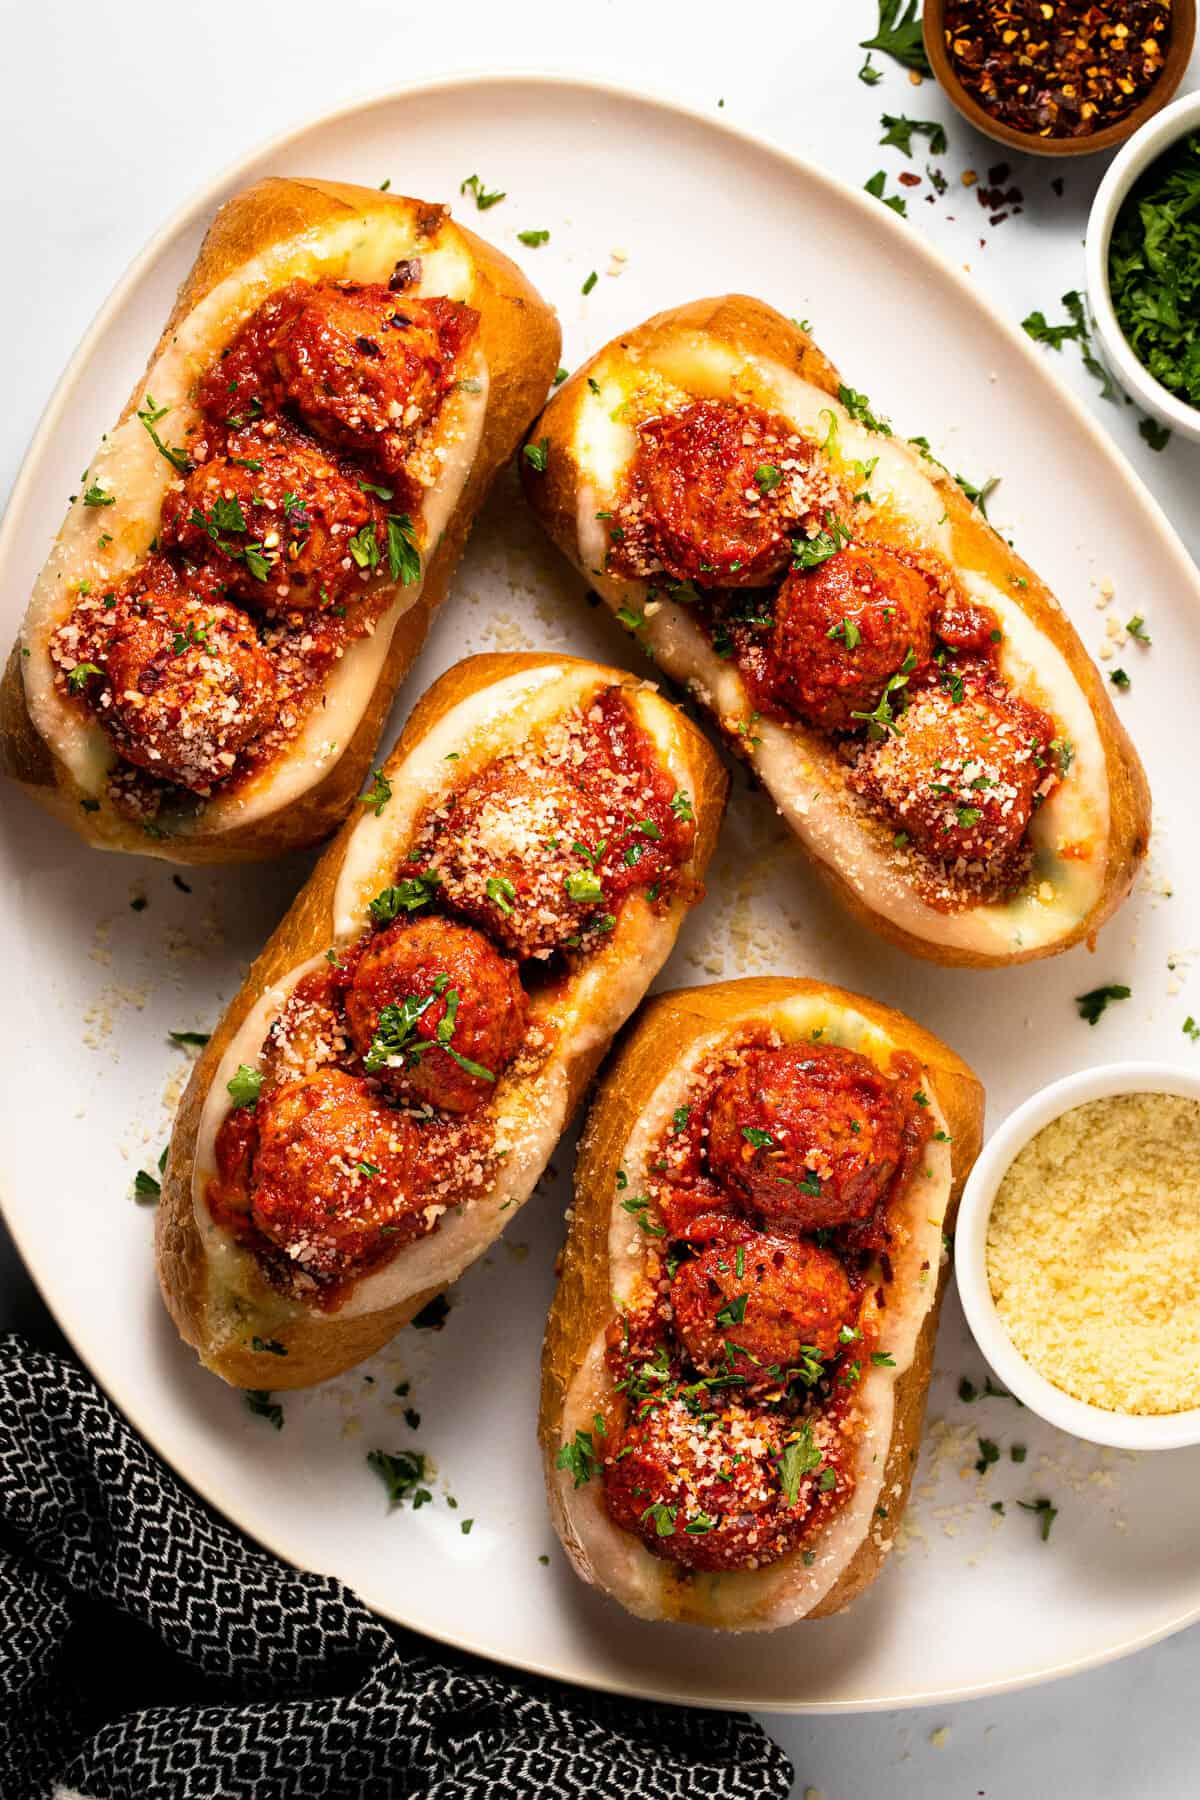 Meatball subs garnished with parsley on a large white serving platter